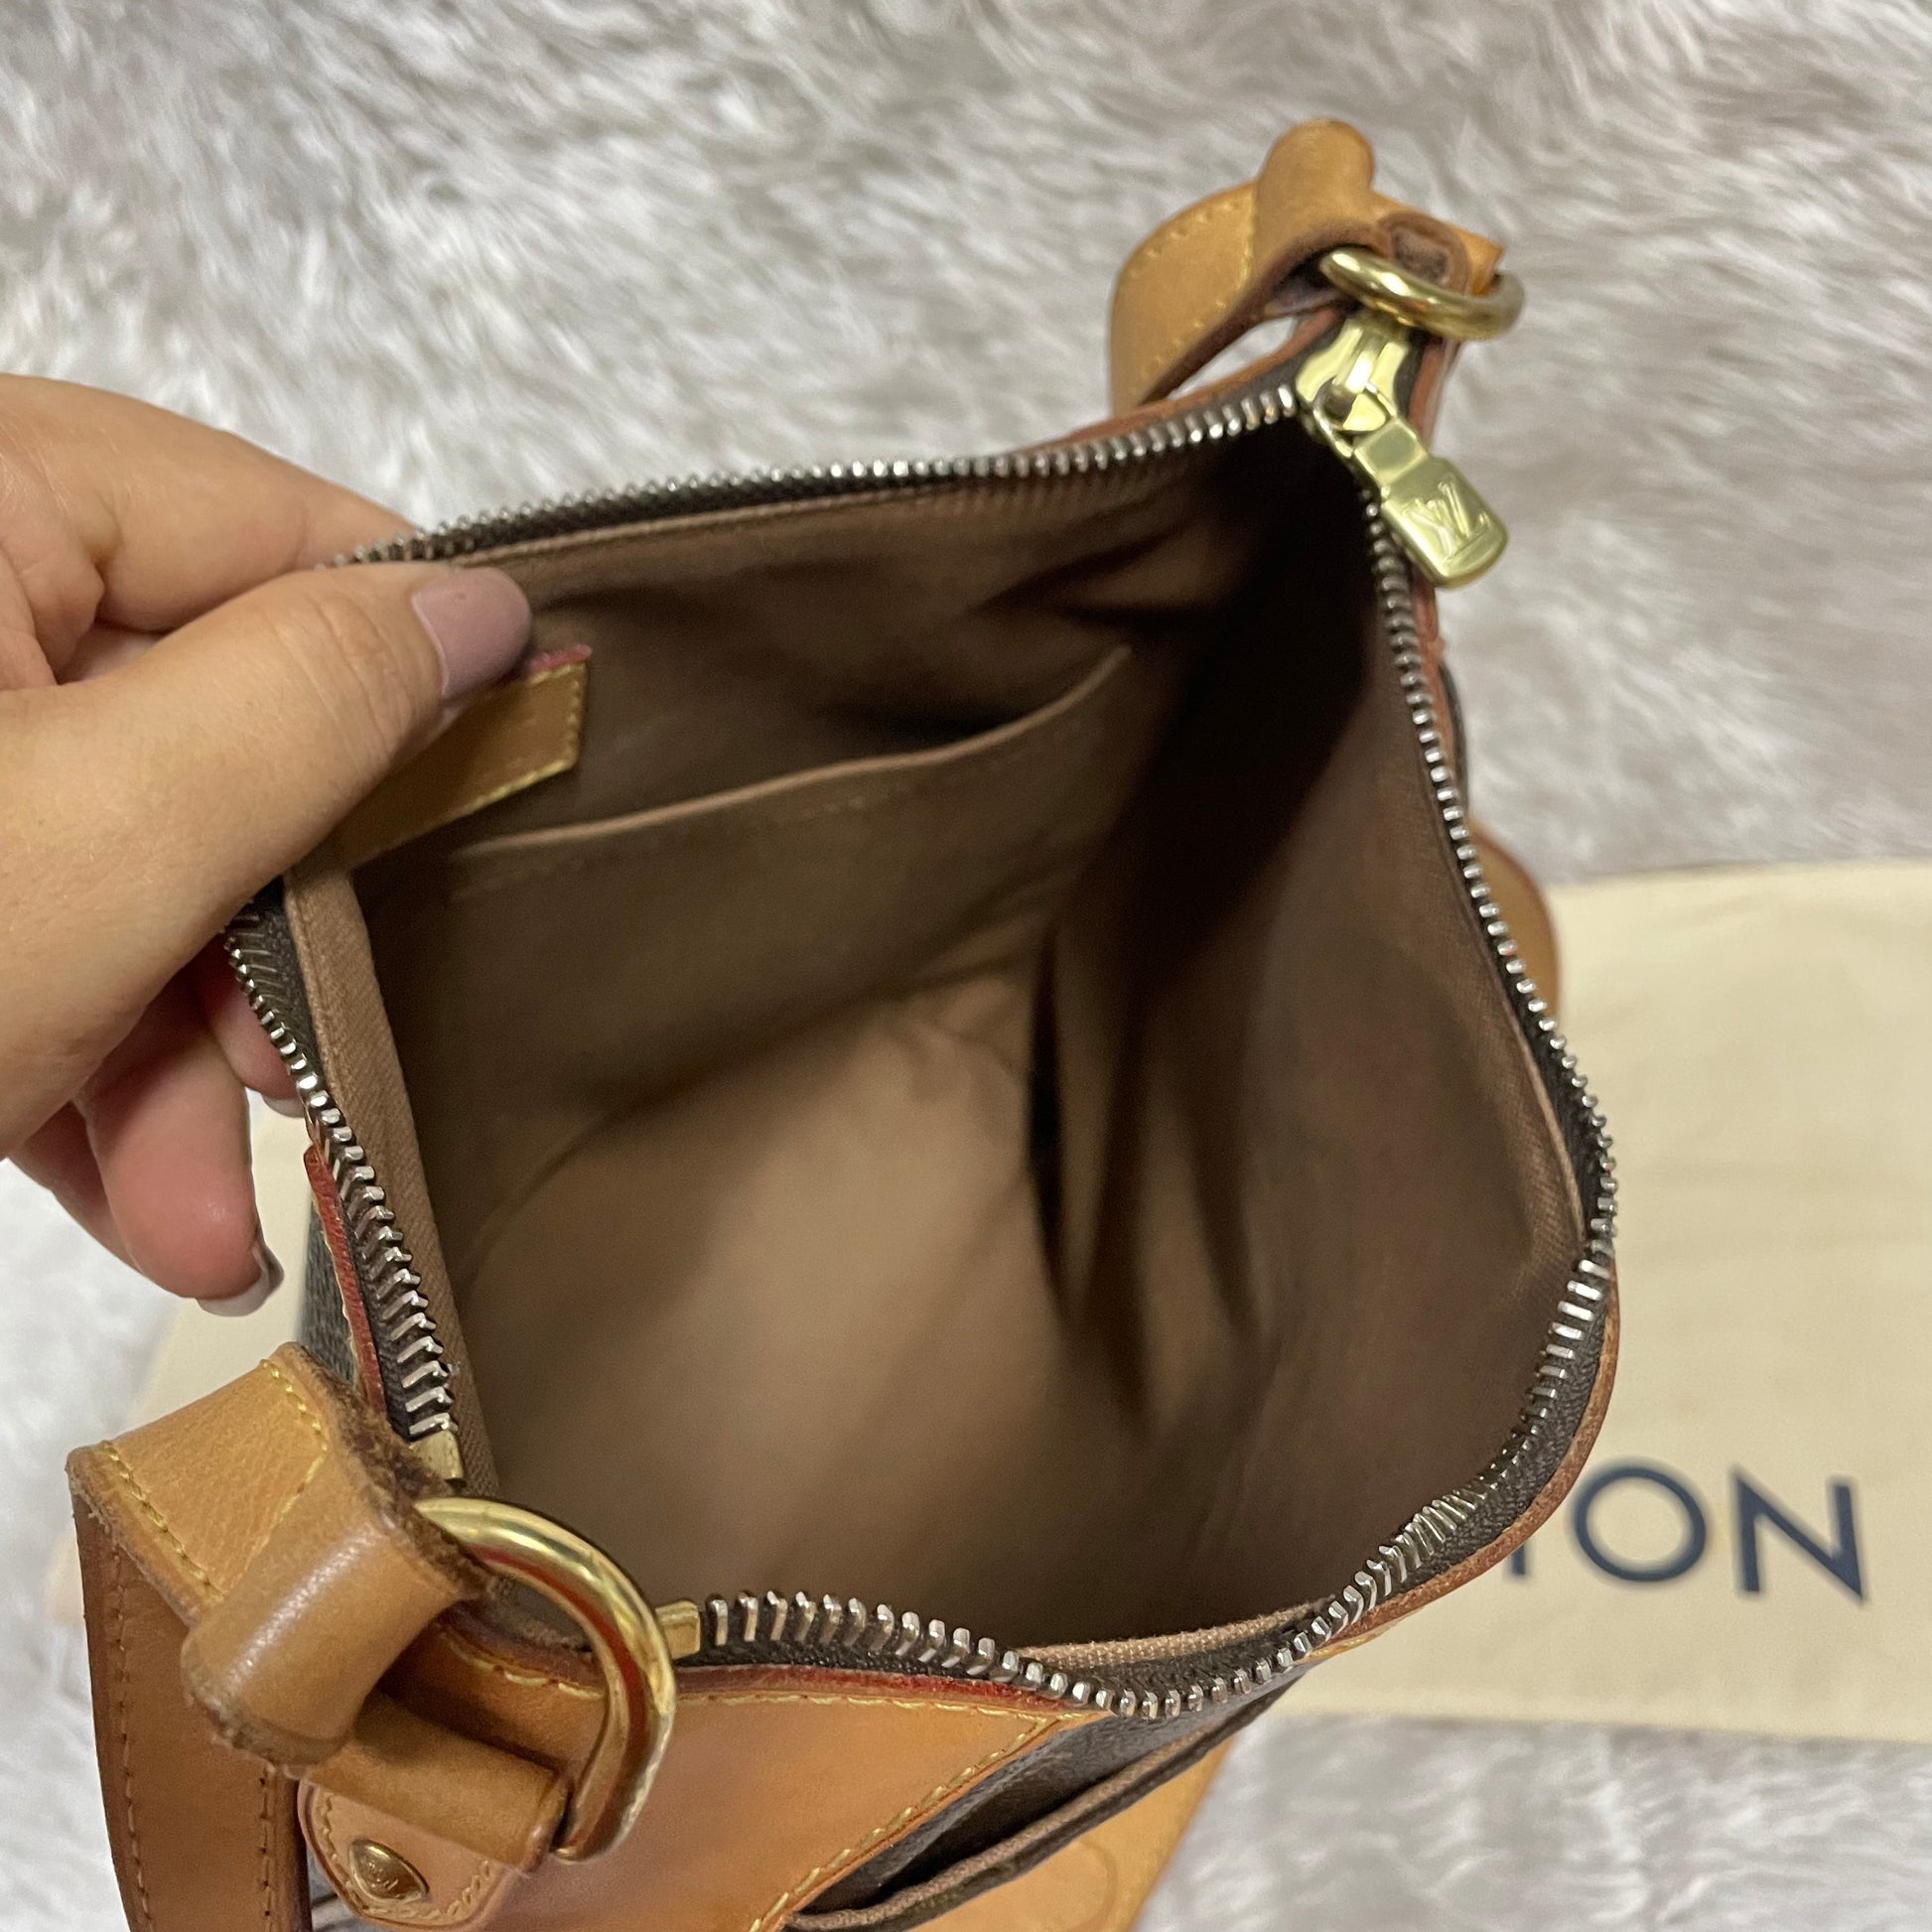 Authentic Odeon pm crossbody monogram in great condition with dust bag –  MKS BRAND